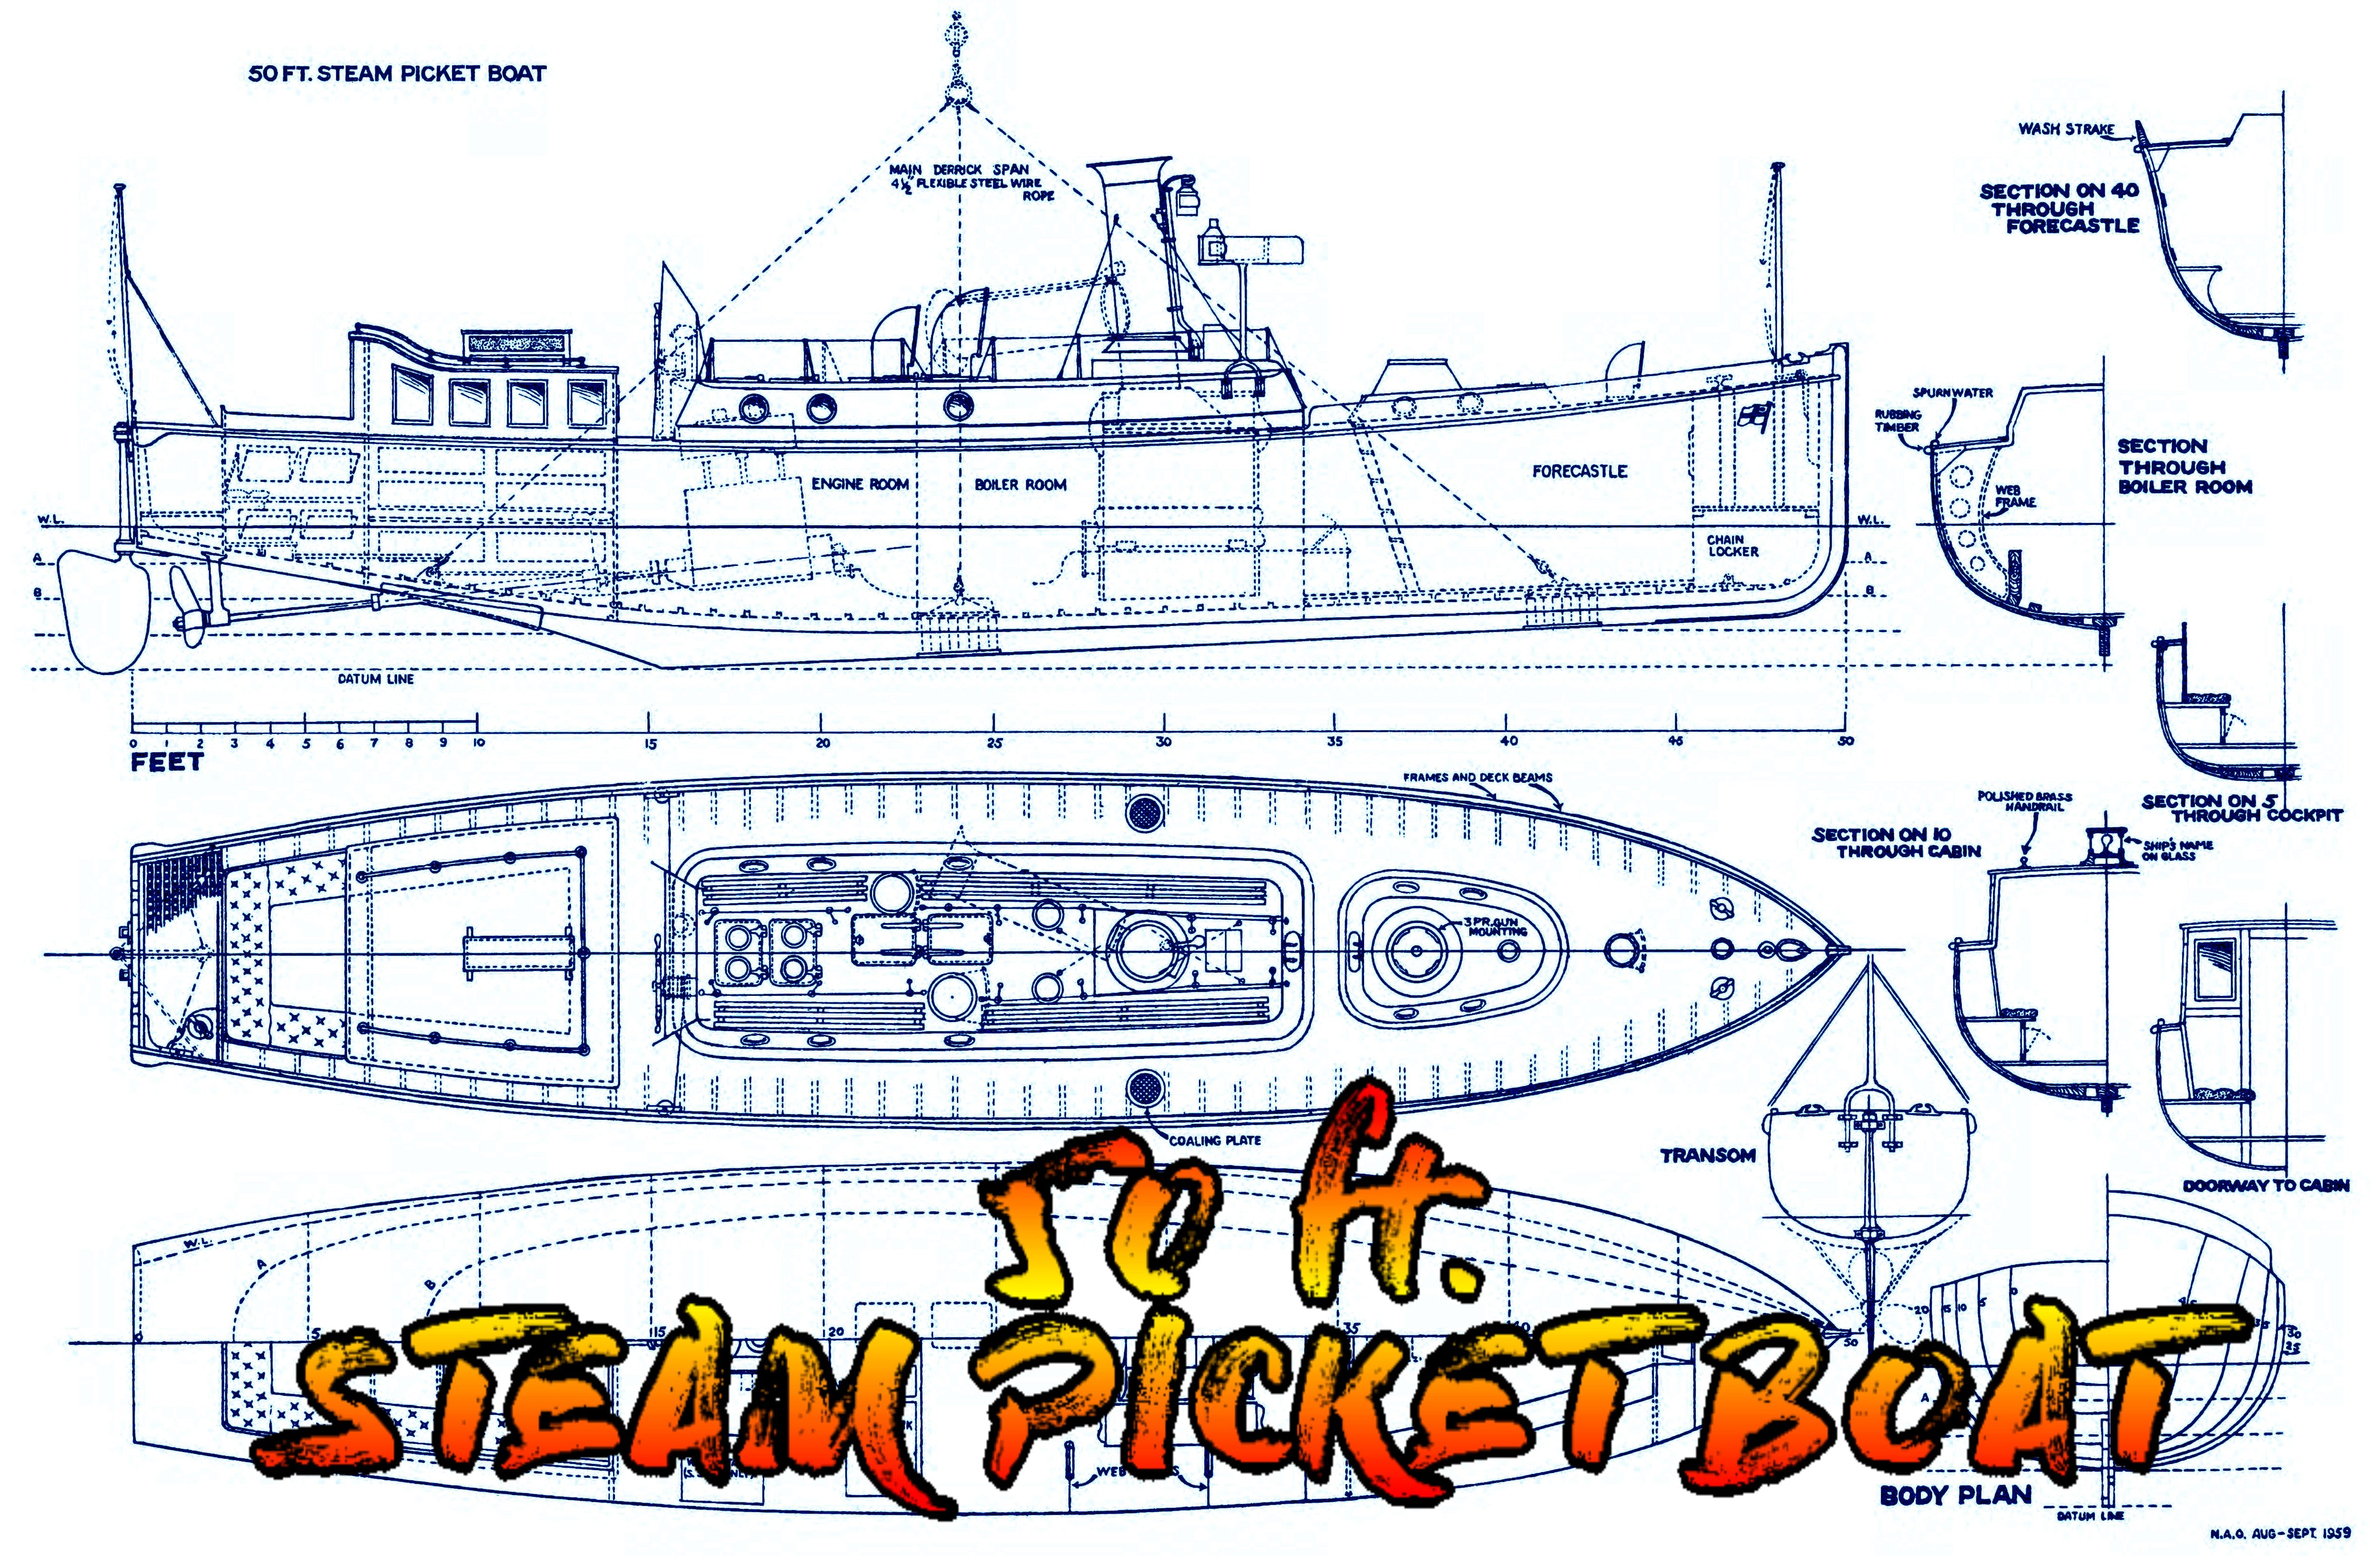 full size scale 1/16 drawings 50 ft. steam picket boat suitable for radio control